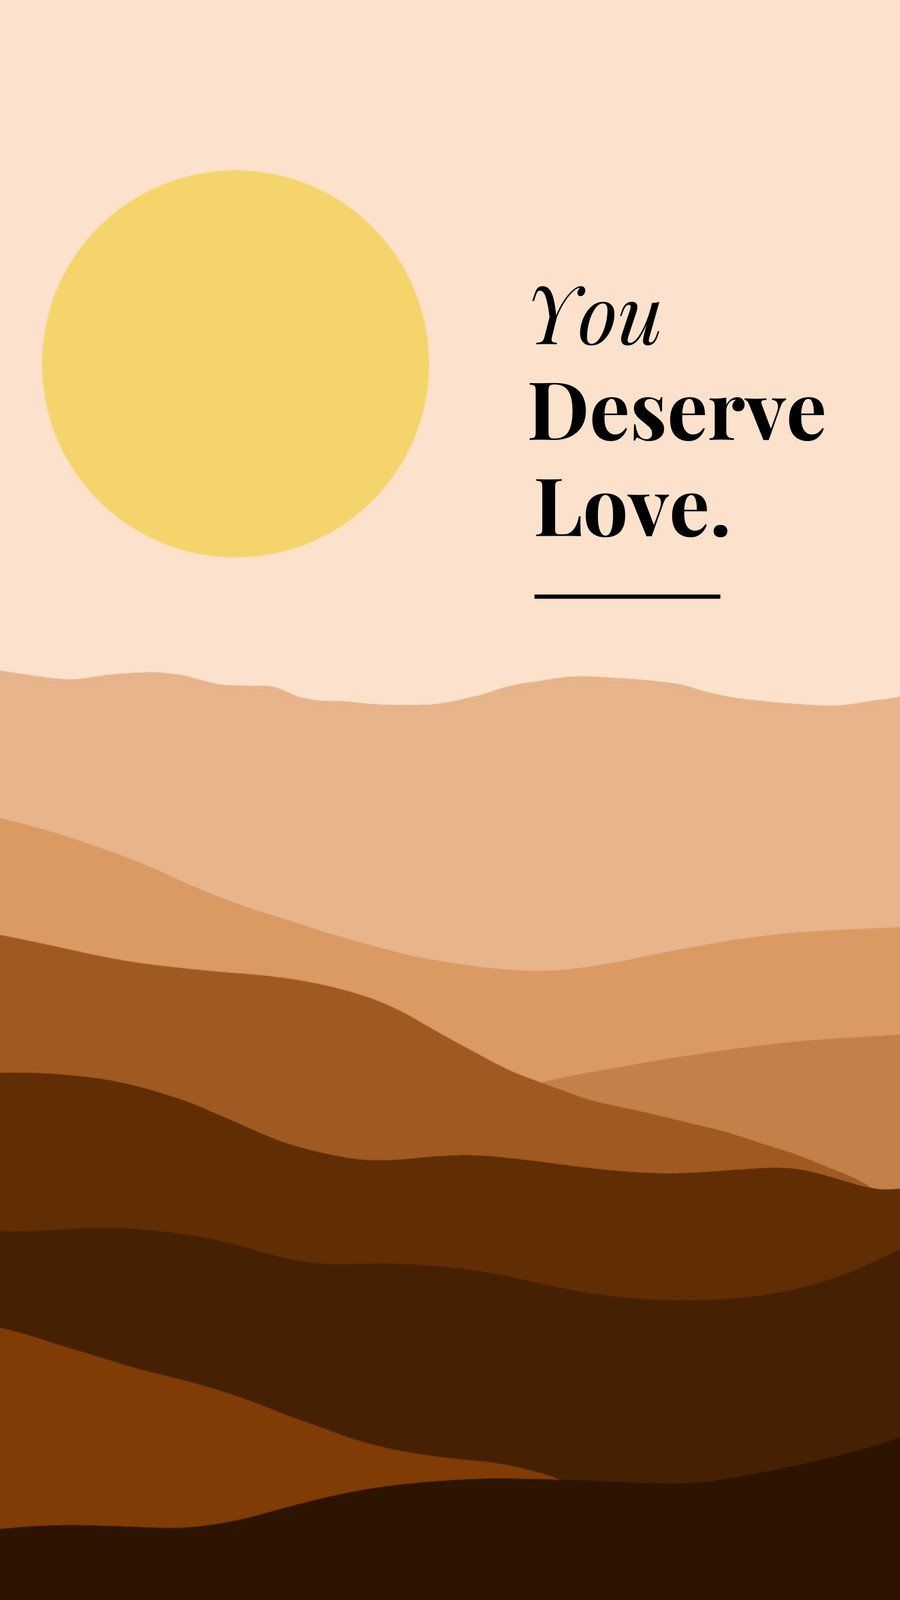 A minimalist desert landscape illustration with the sun in the top left corner and the words 